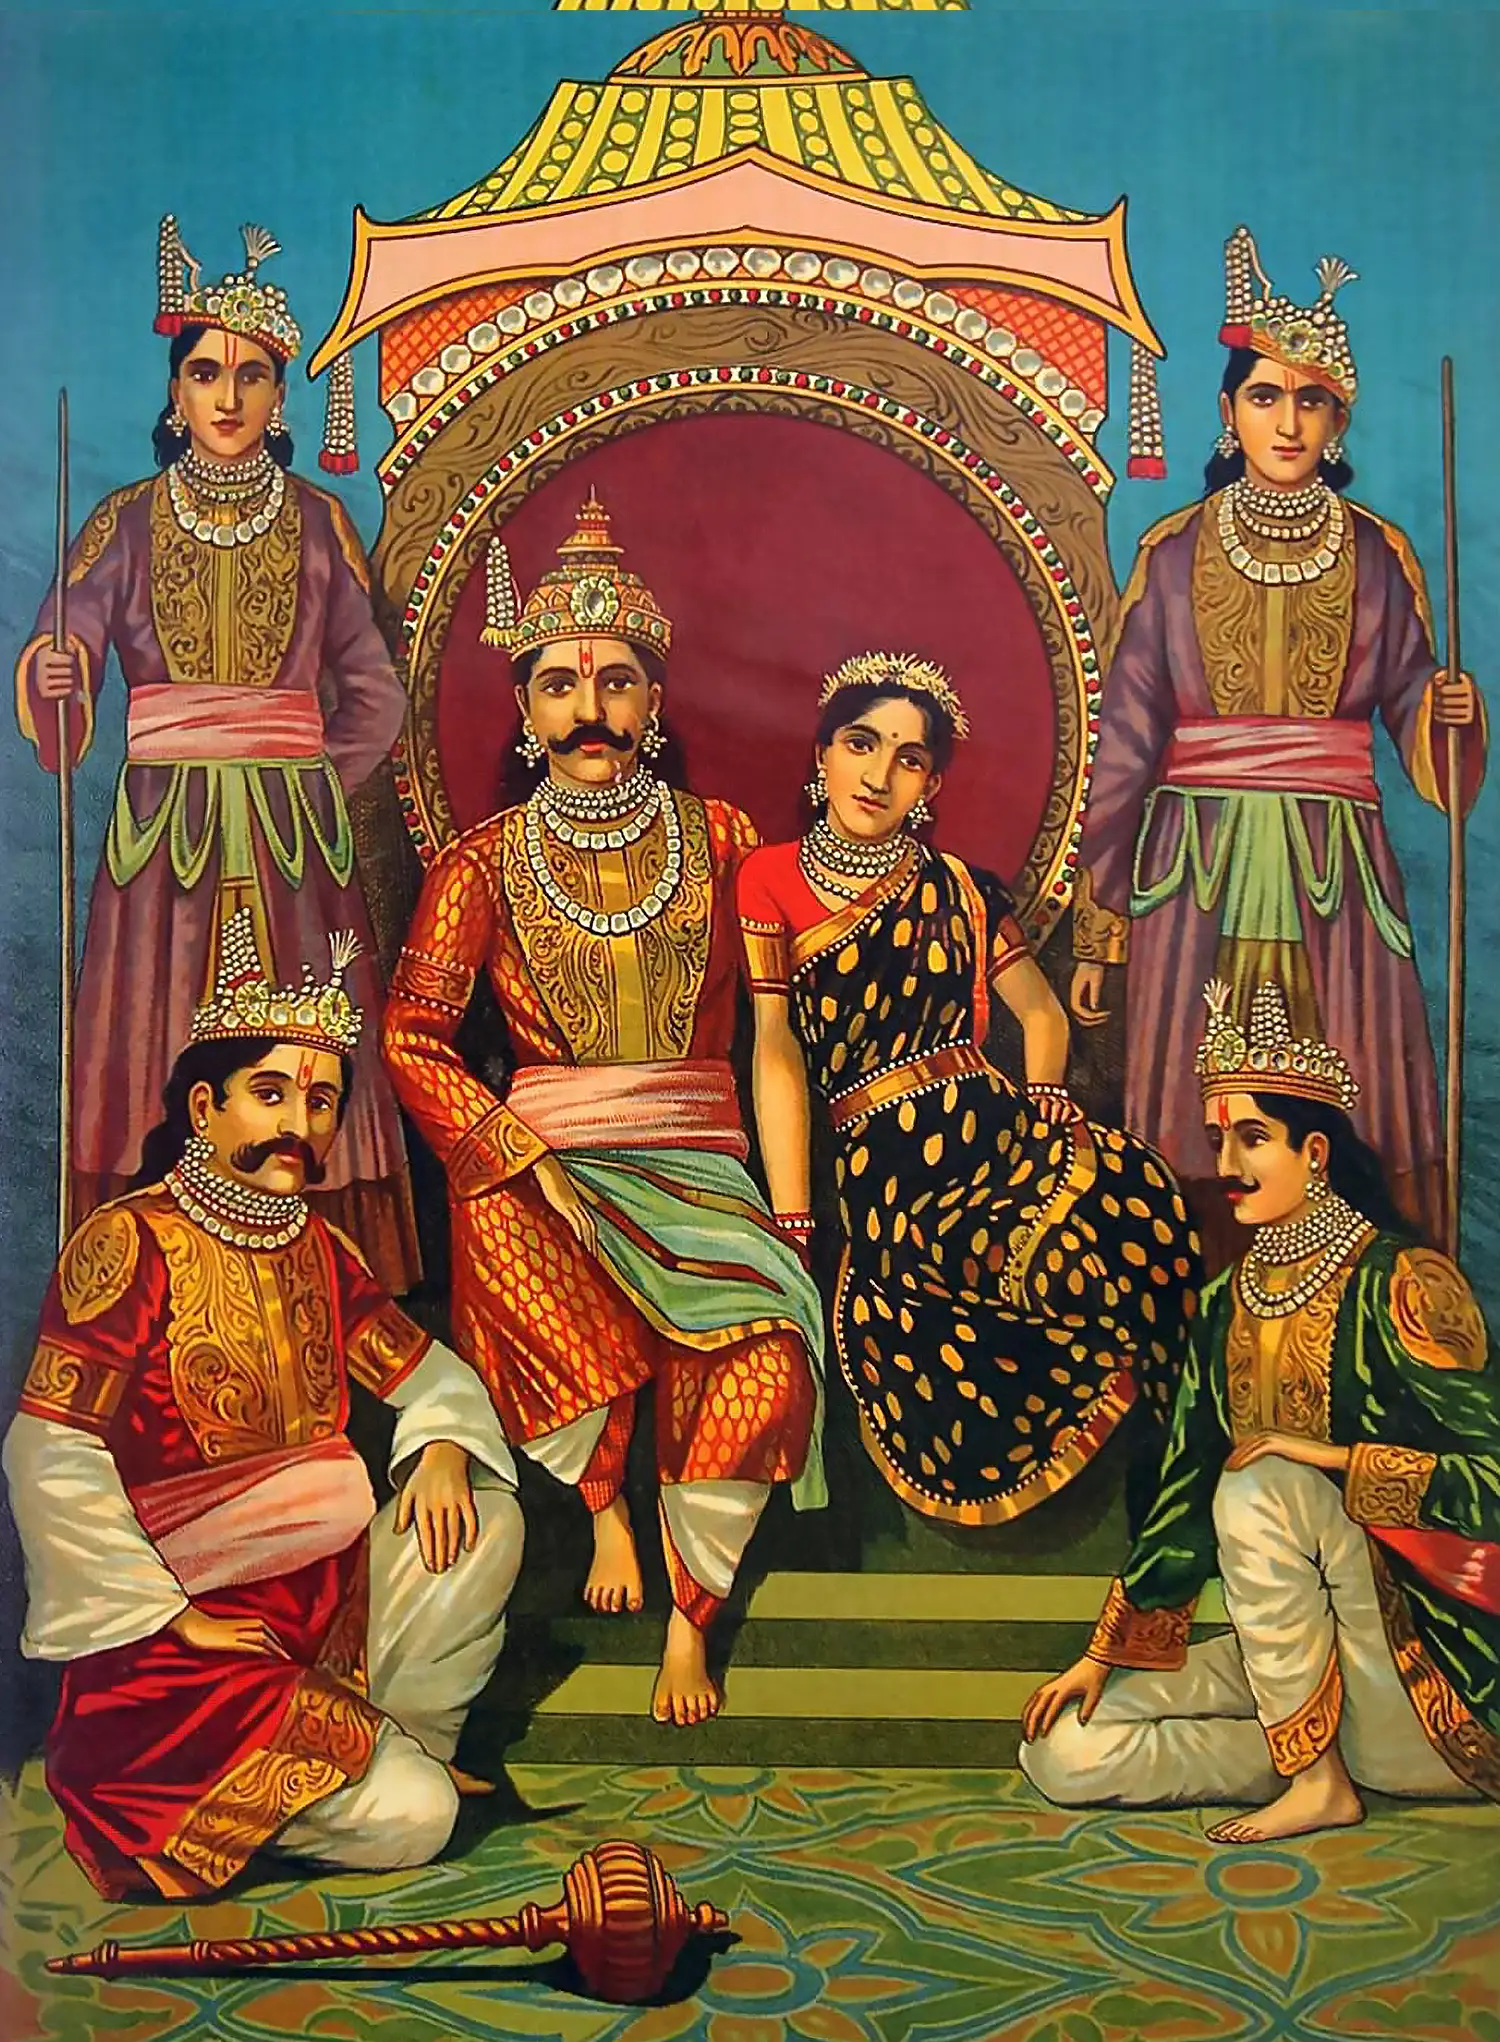 Four Pandava brothers are standing and one is seated in the center, together with Draupadi, their common consort. 